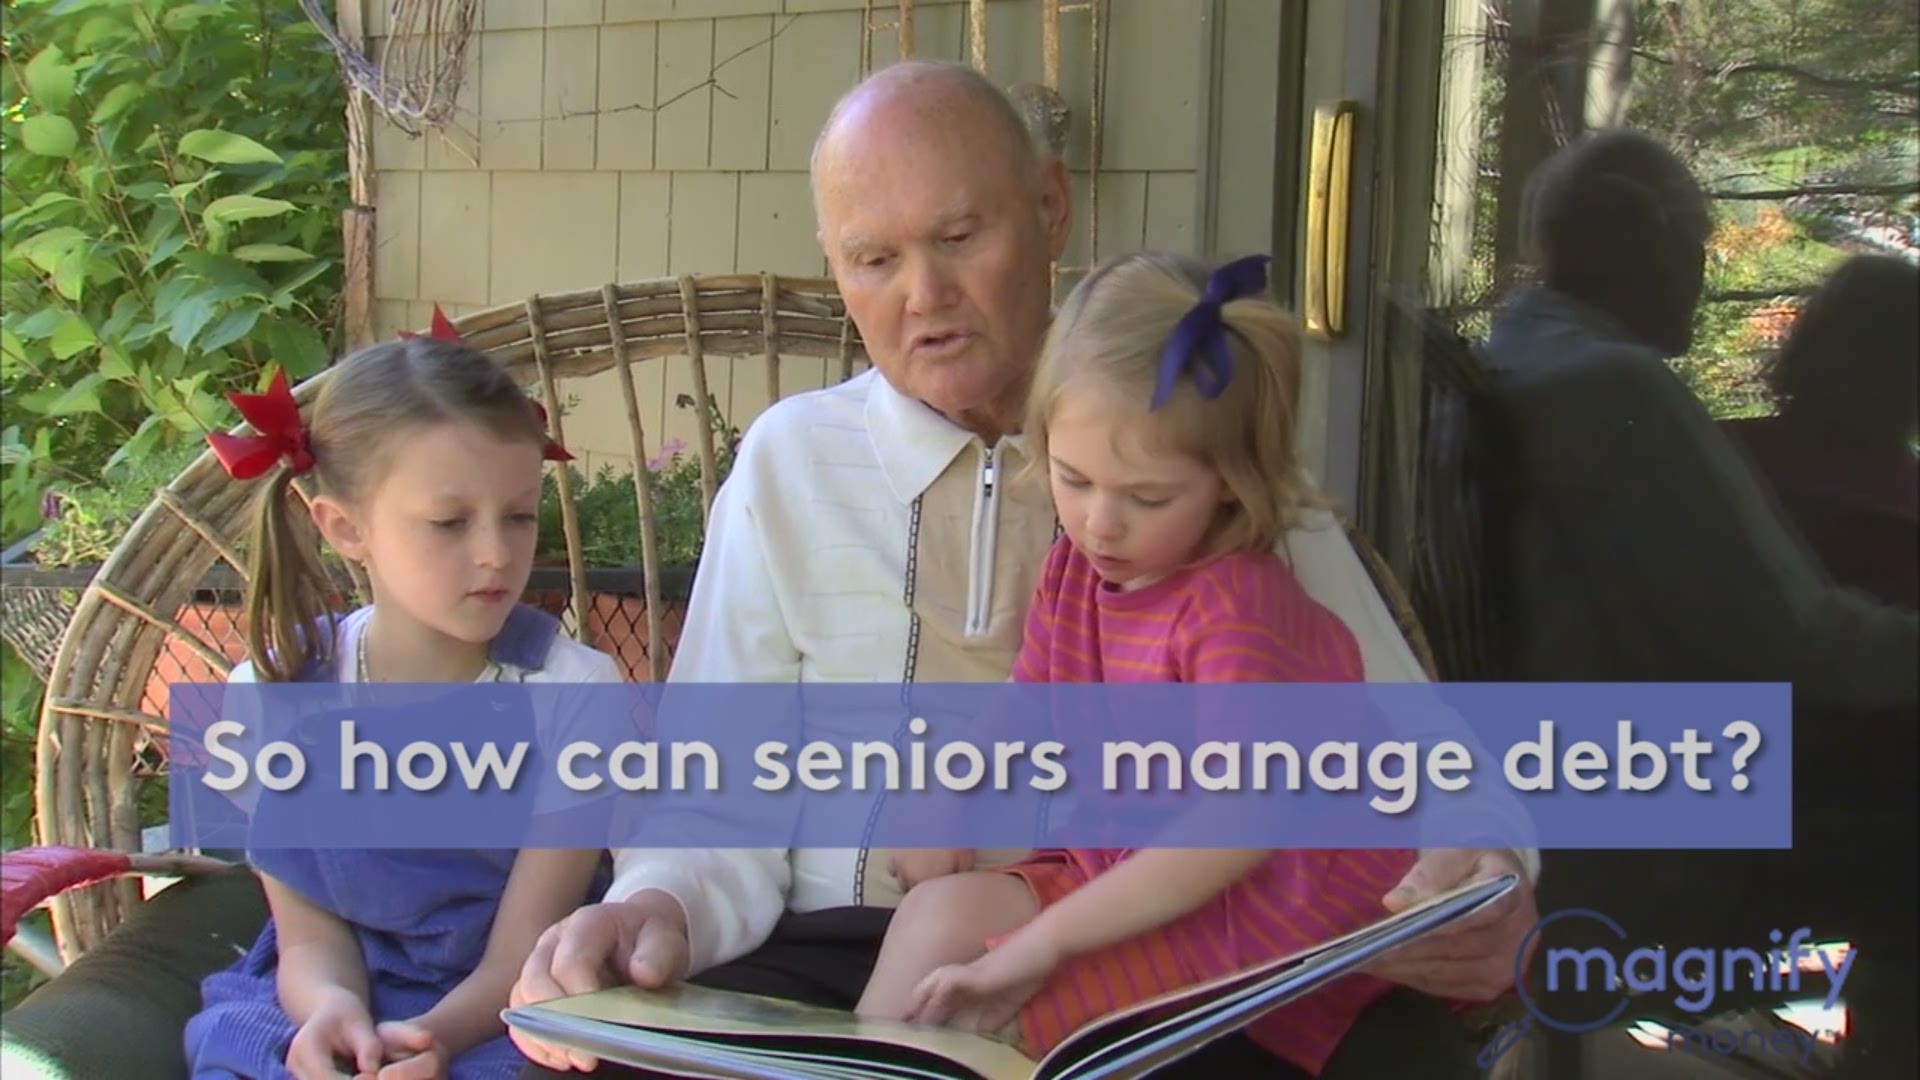 More American seniors are taking debt into their retirement years. Video from MagnifyMoney.